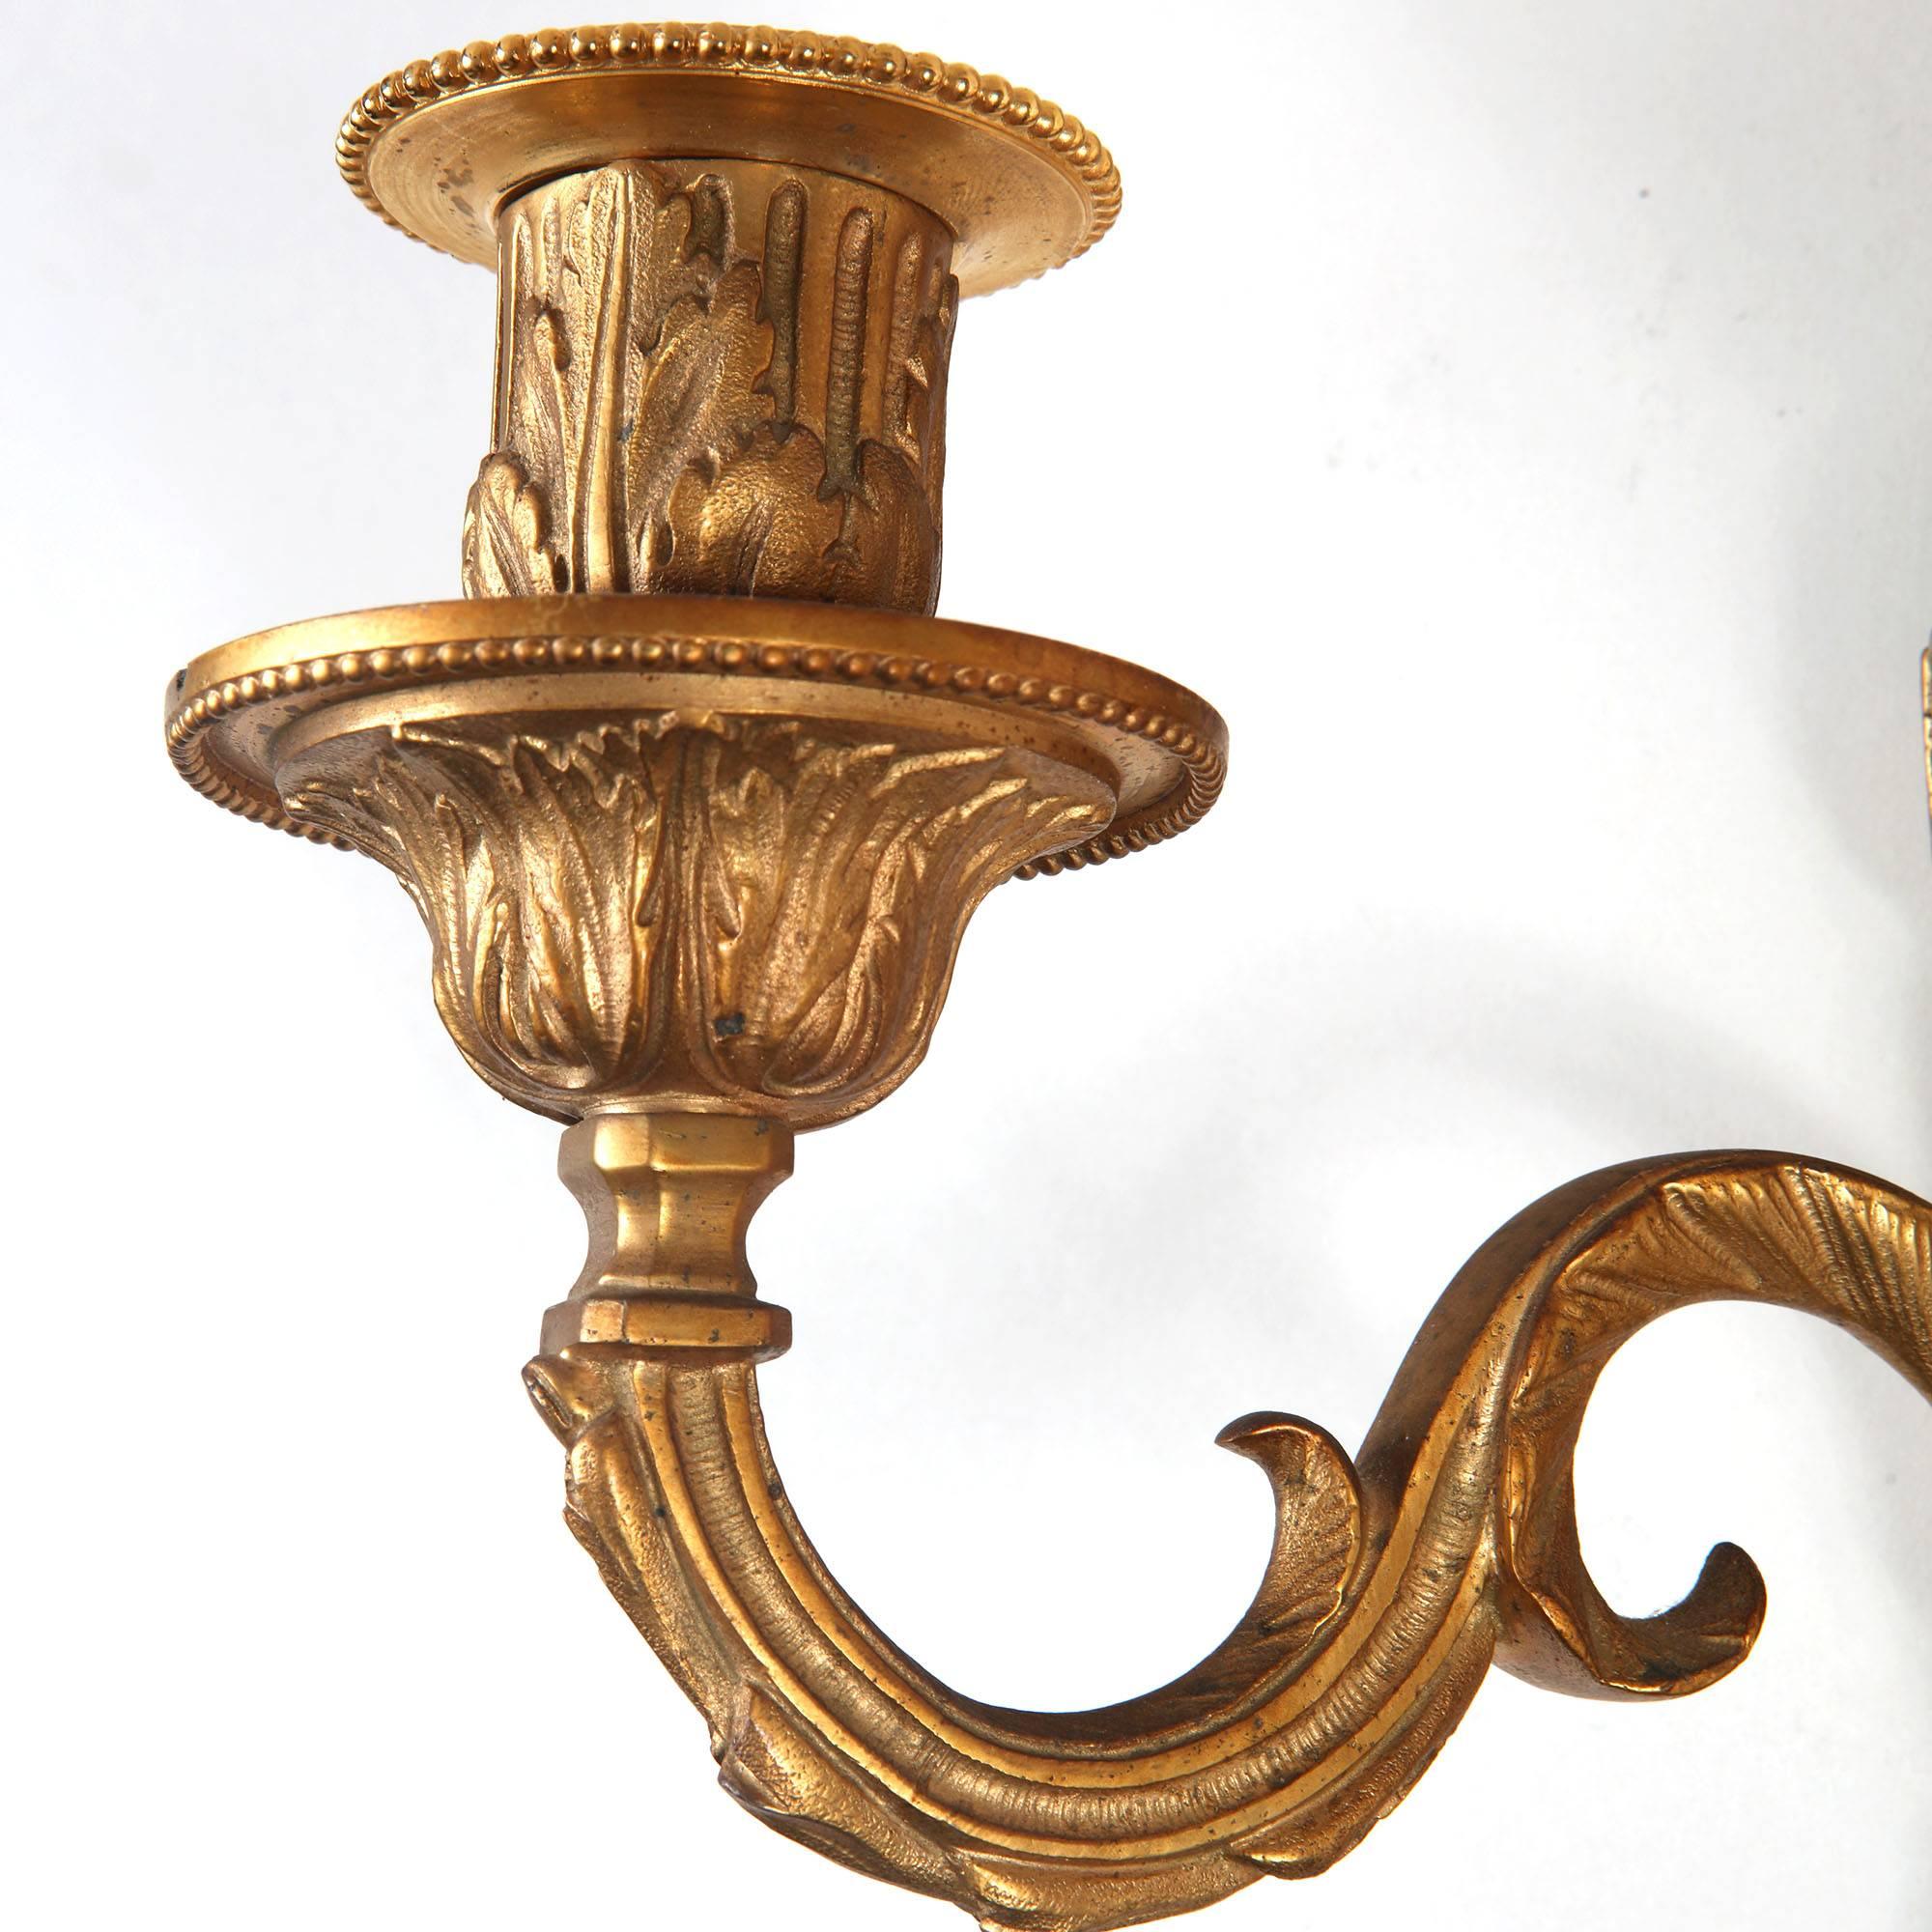 Neoclassical Pair of Two-Light Flaming Urn Wall Appliques